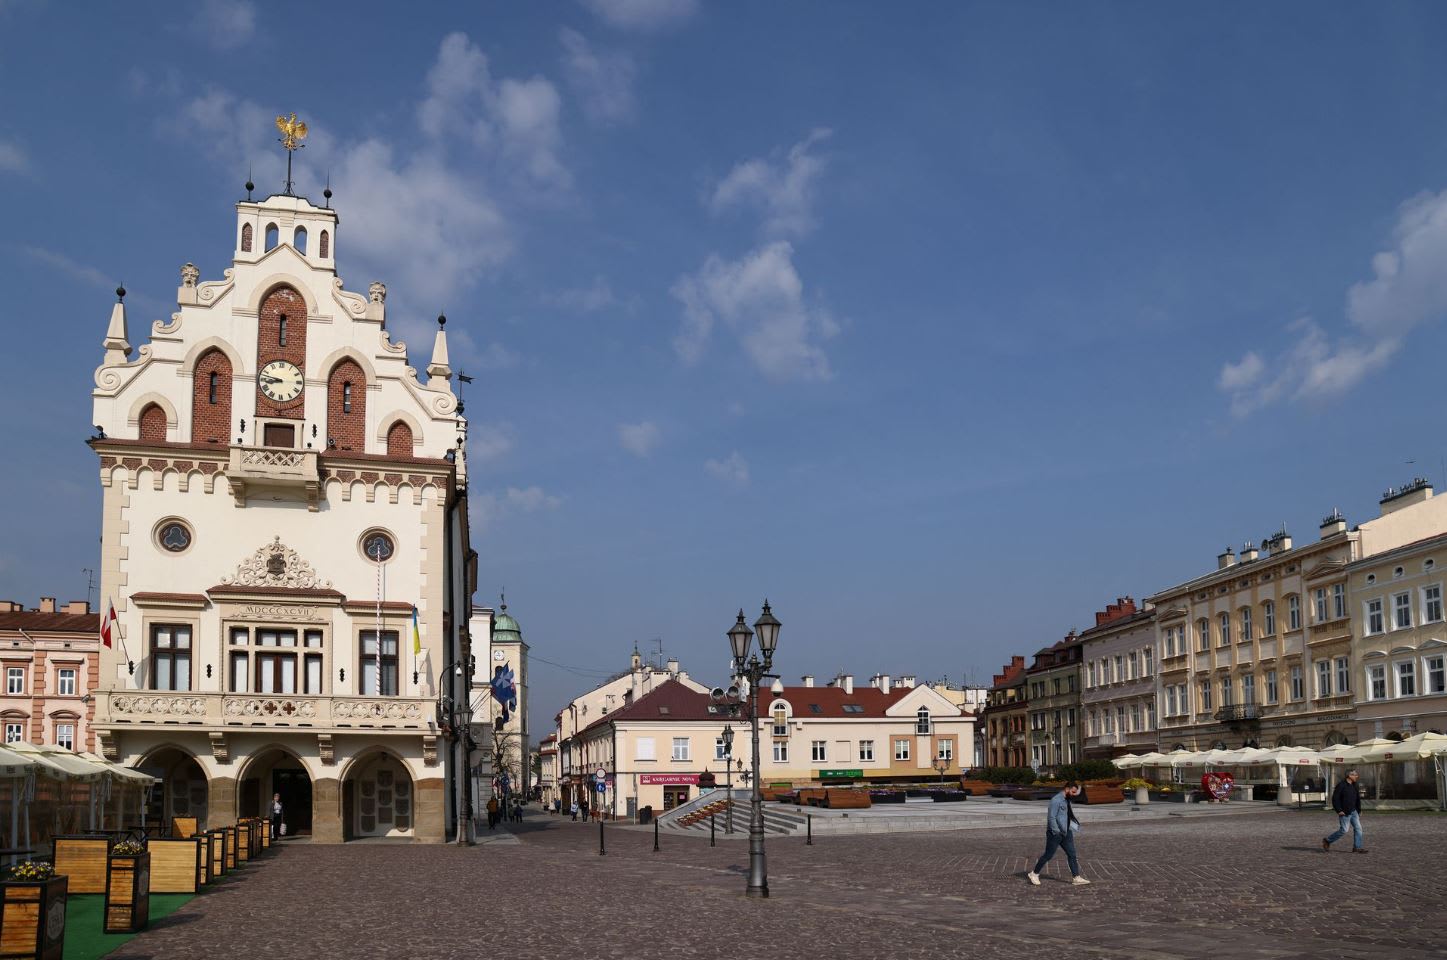 A general view of the old market place with the town hall in Rzeszow, Poland on April 29, 2022. 

